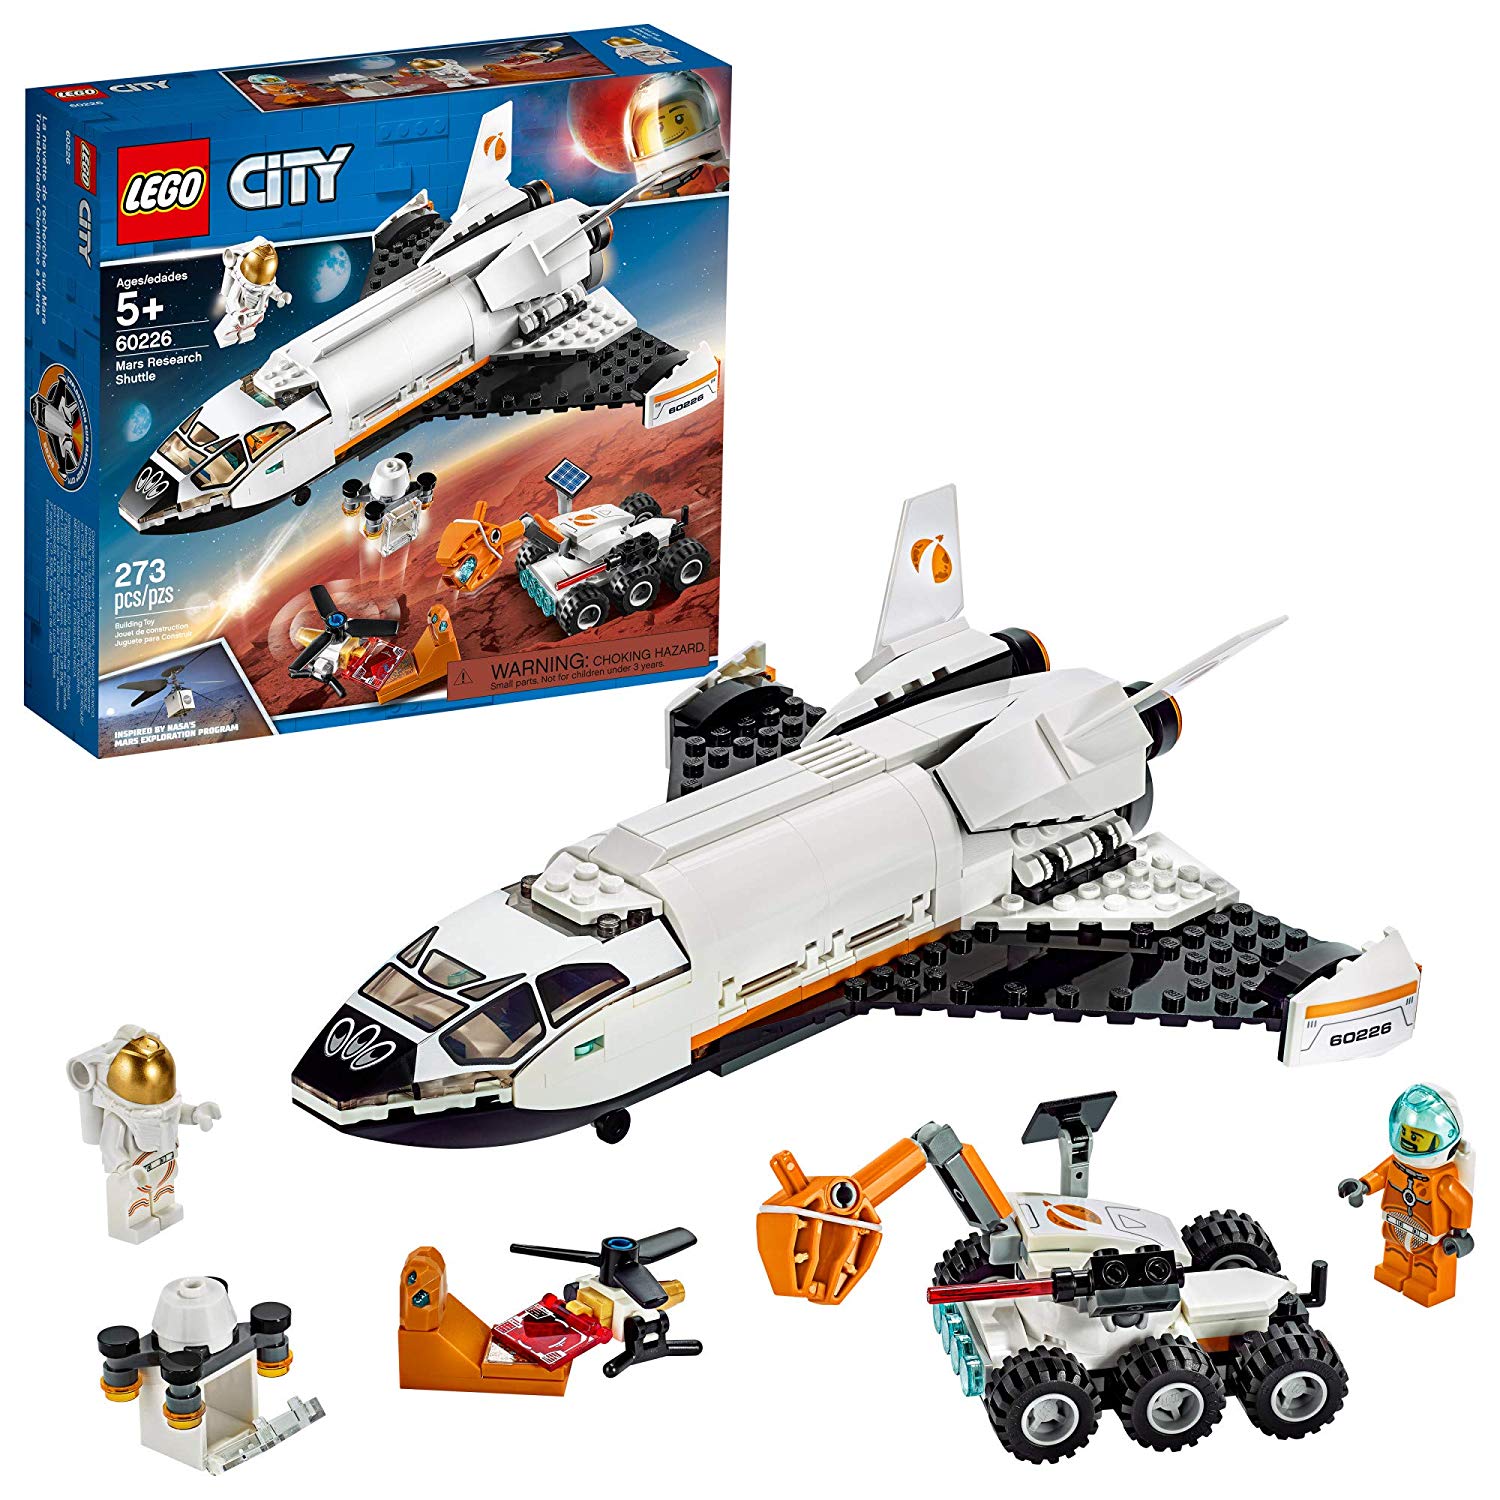 Lego City Space 60226 Space Shuttle (273 Pieces)